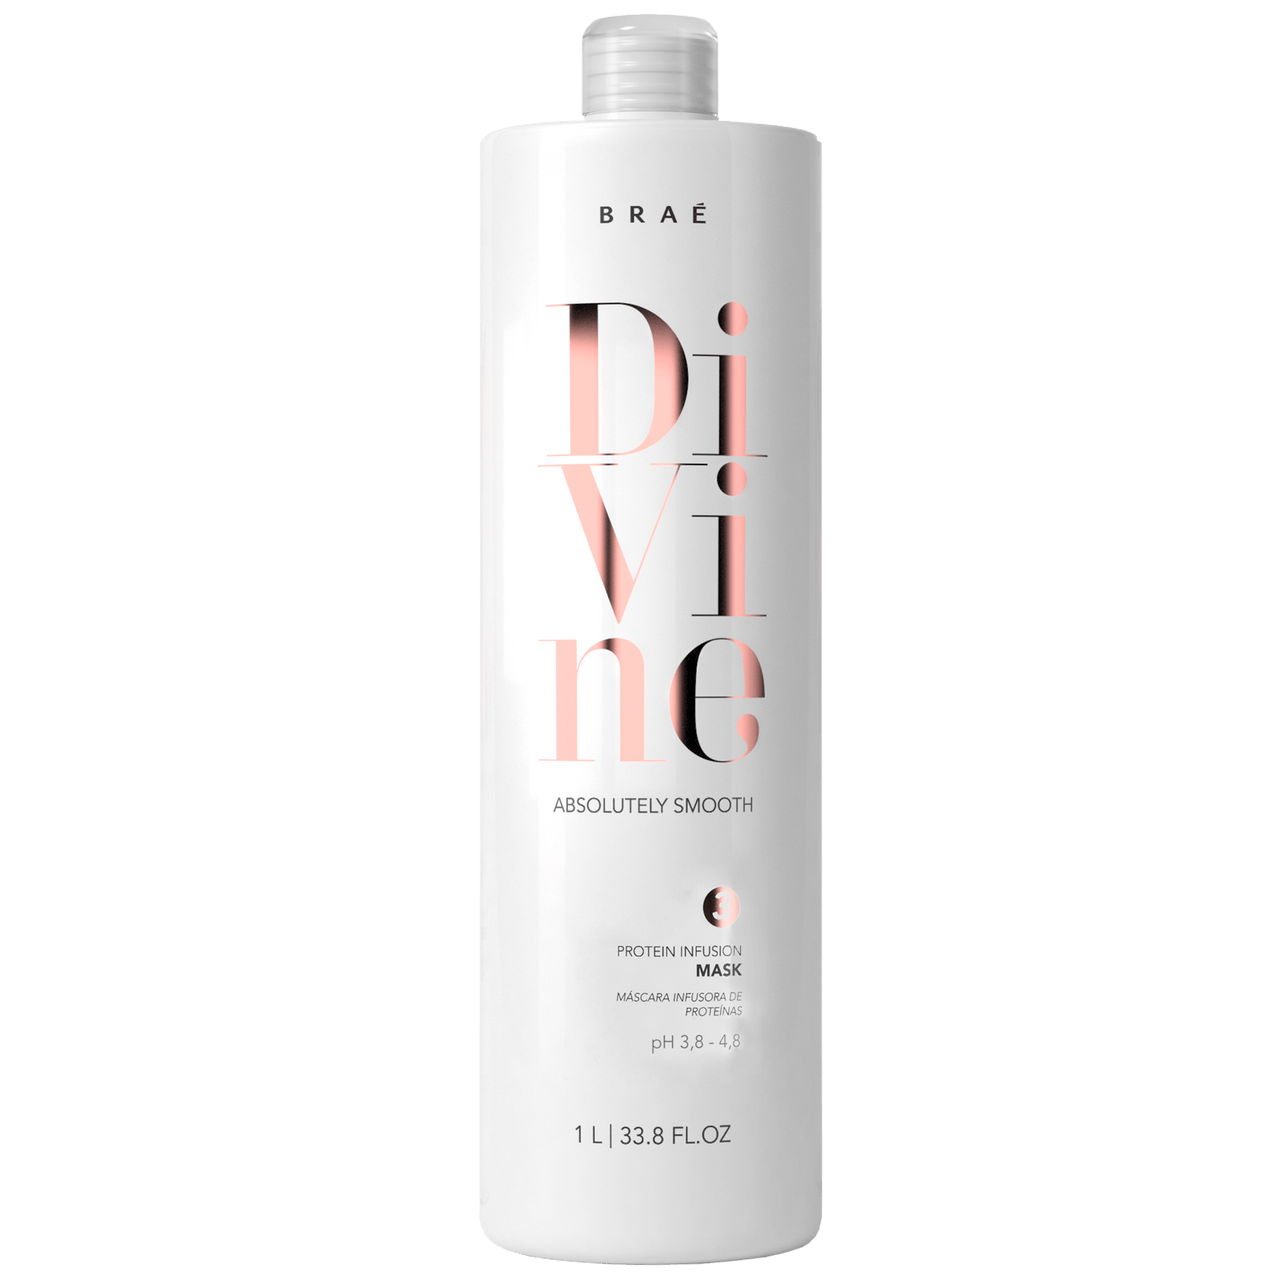 BRAE - Divine Protein infusion Mask 1L